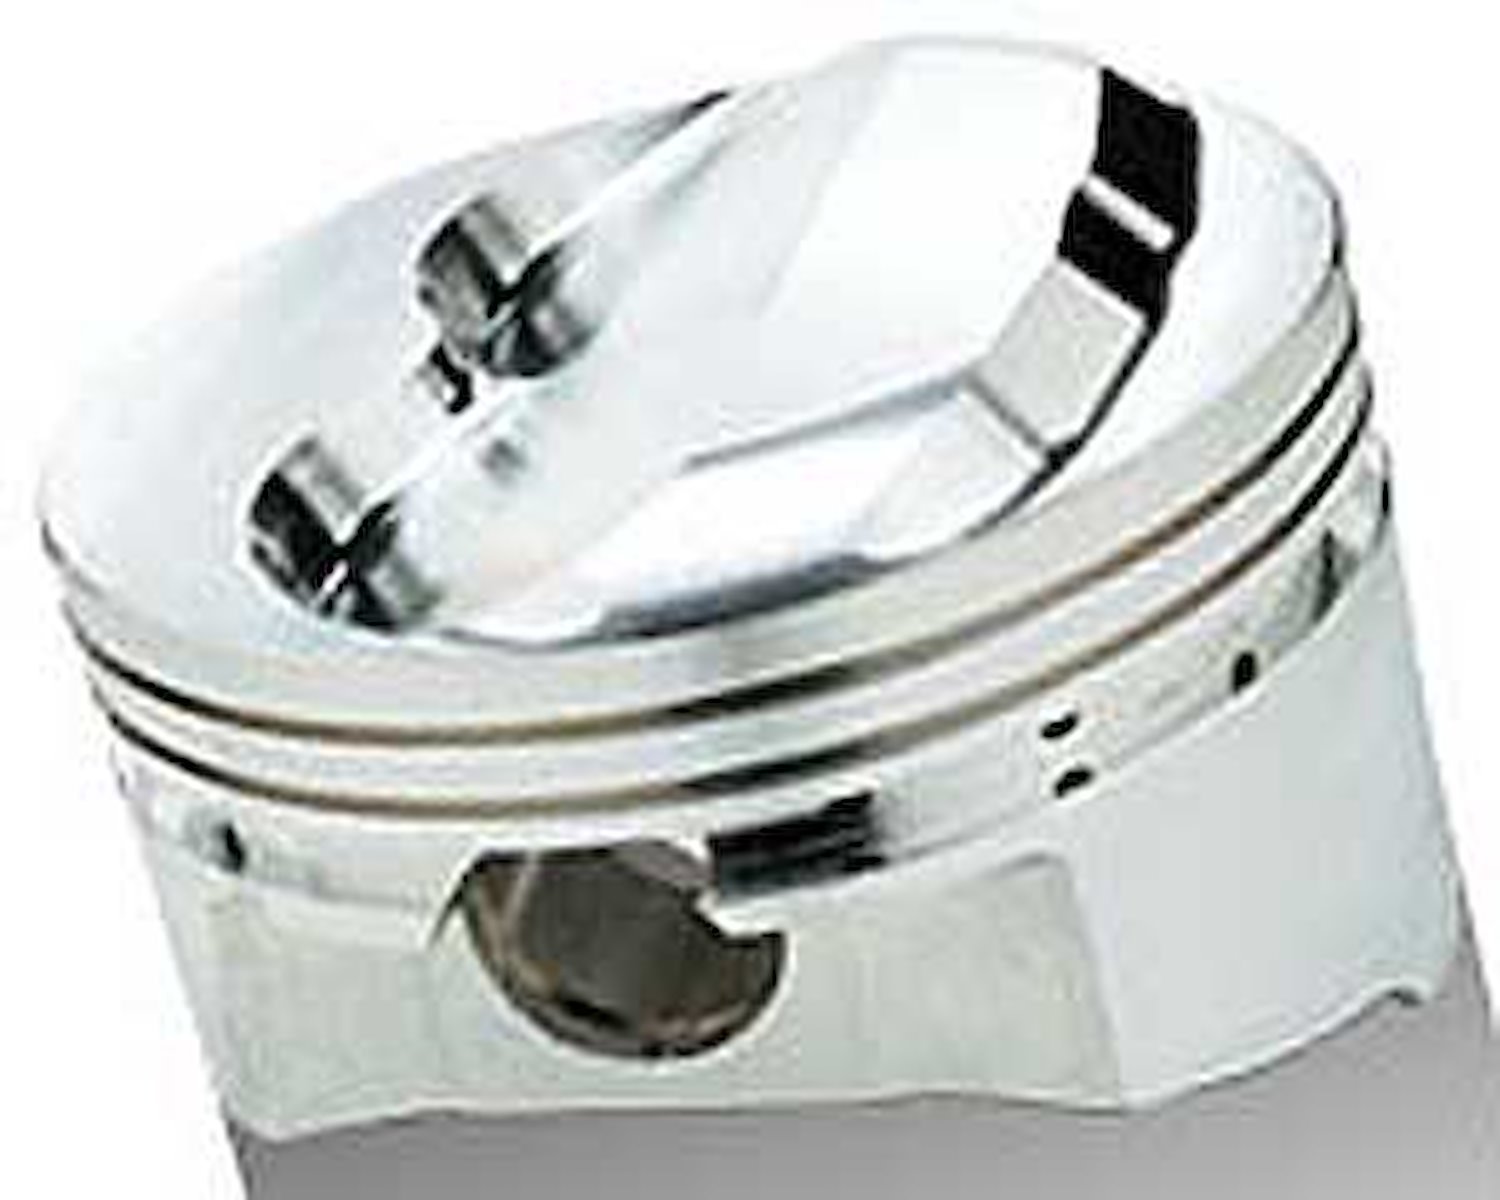 SRP Dome Pistons for Small Block Chevy Bore 400 4.145"